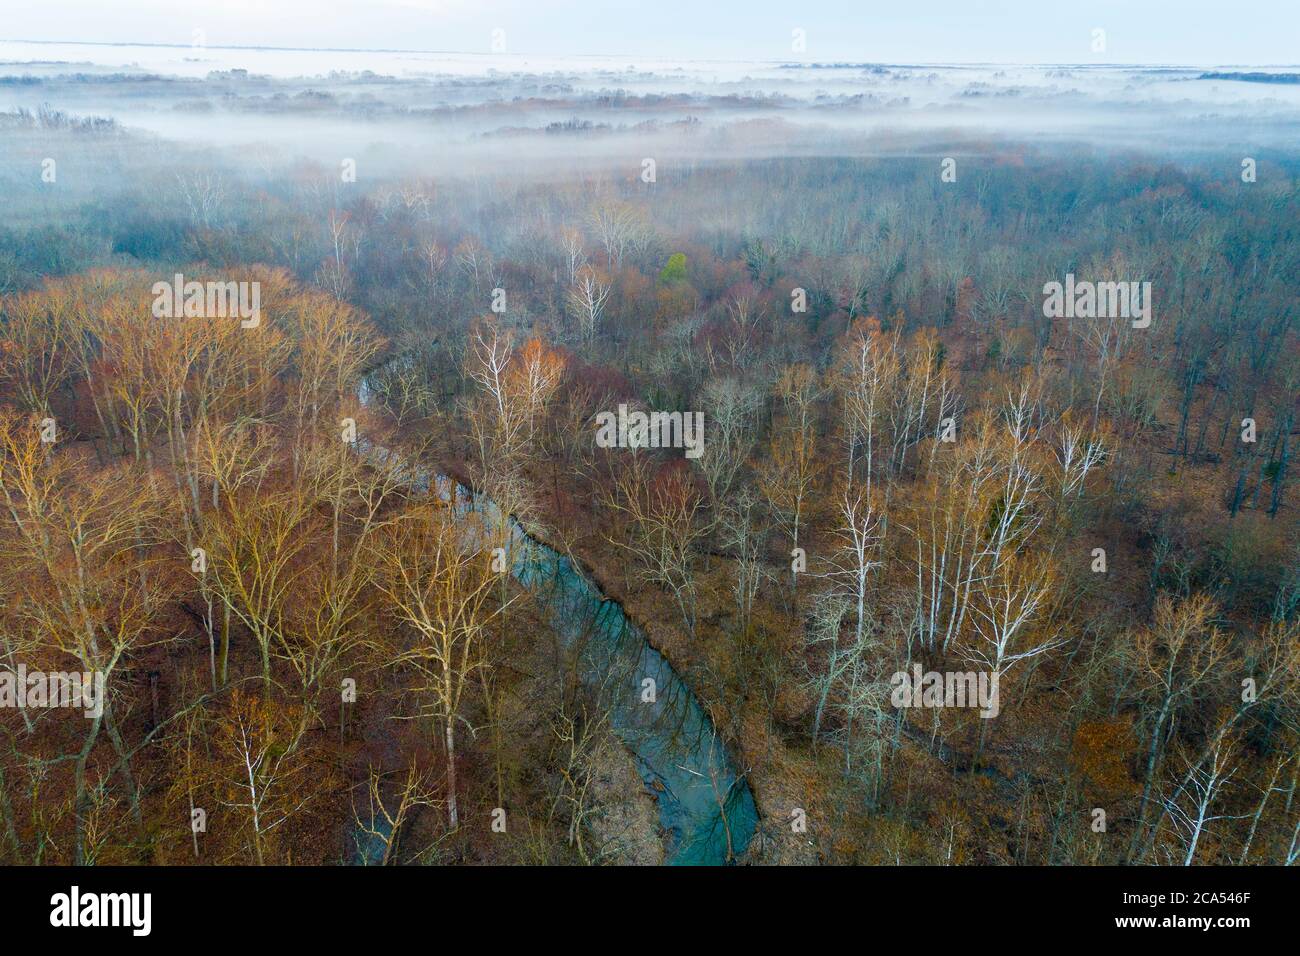 Aerial view of stream in forest in foggy day, Stephen A. Forbes State Park, Marion Co., Illinois, USA Stock Photo